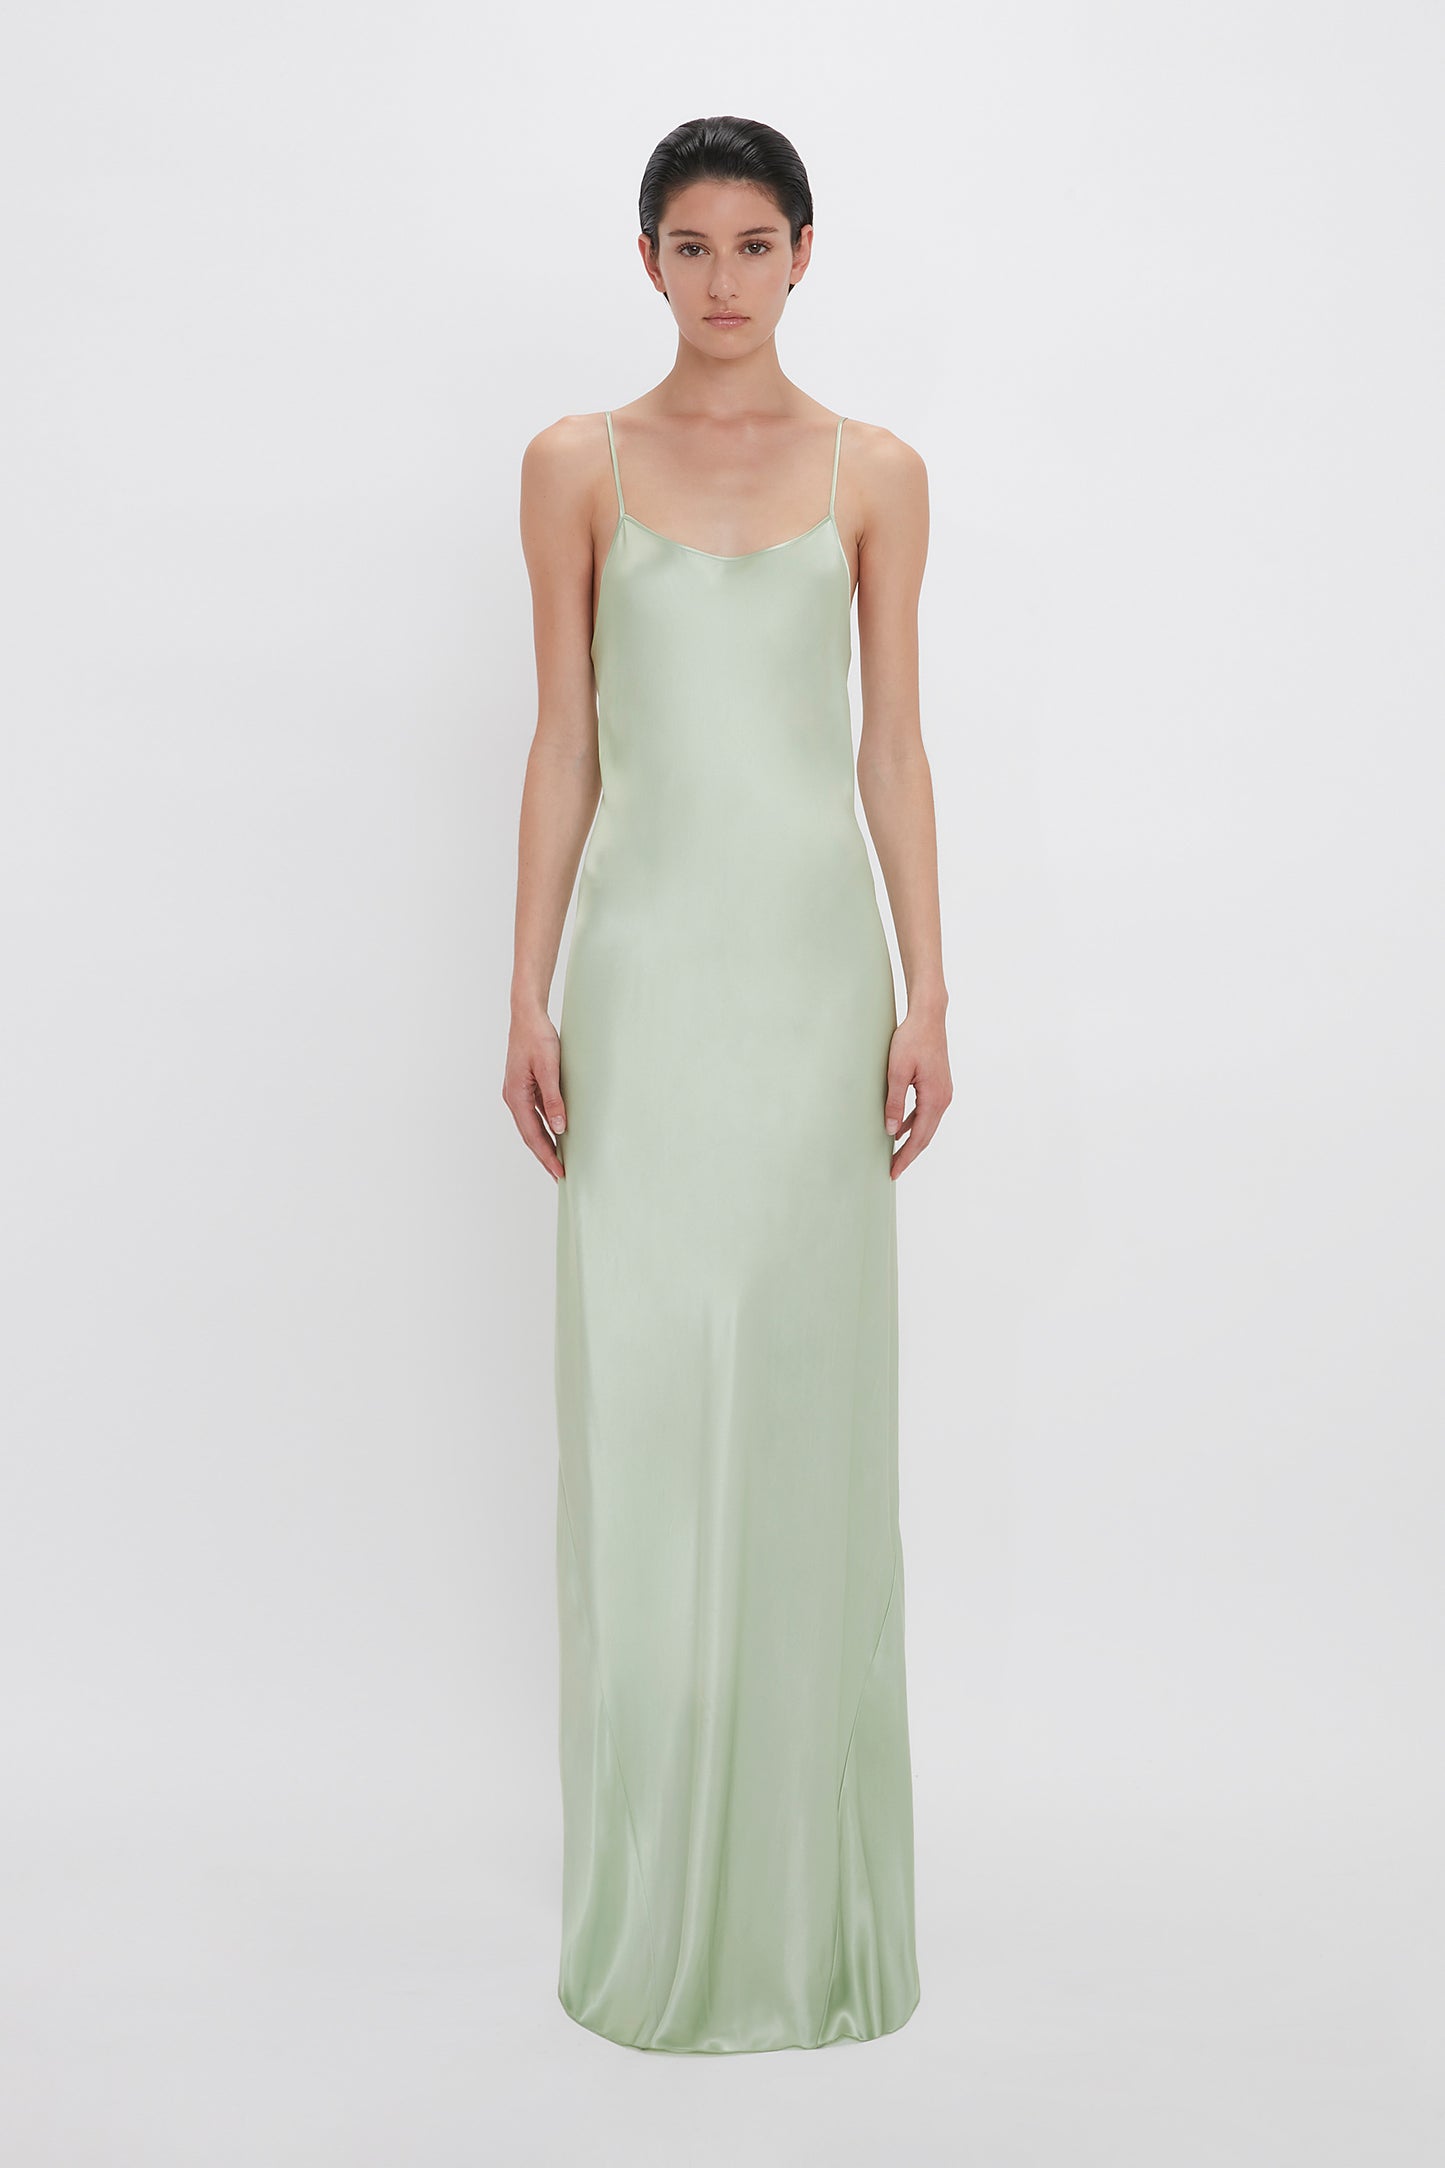 Woman in an Exclusive Low Back Cami Floor-Length Dress In Jade by Victoria Beckham, standing against a white background.